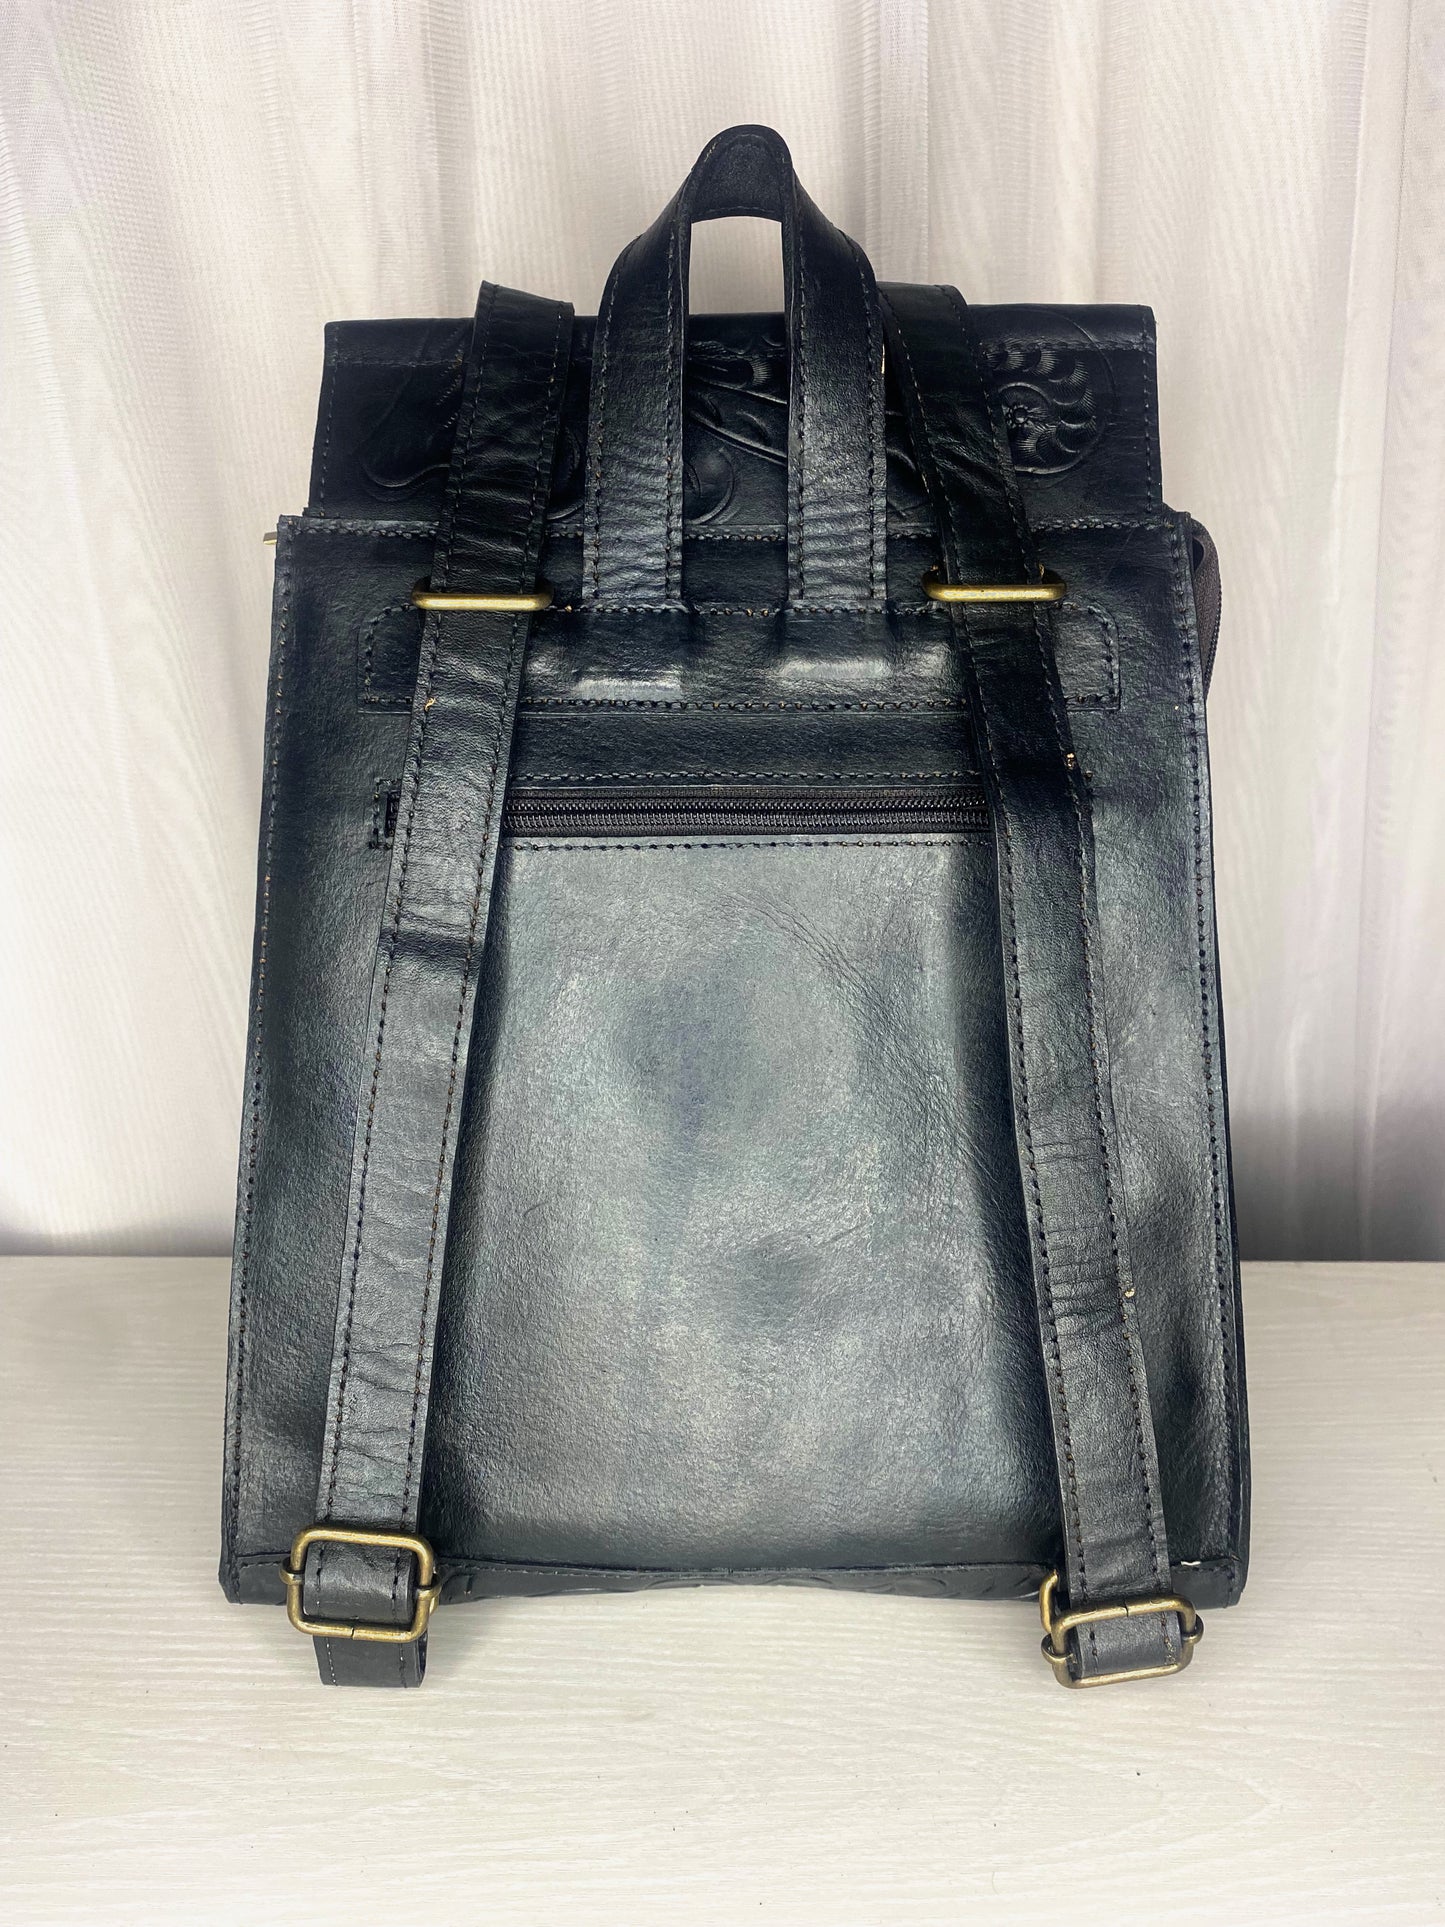 Medium sized authentic leather backpack. Trapezoid shaped with flap with Mexican design on the flap. Straps can be converted to crossbody or used as dual straps.  Back view of straps in color black. 